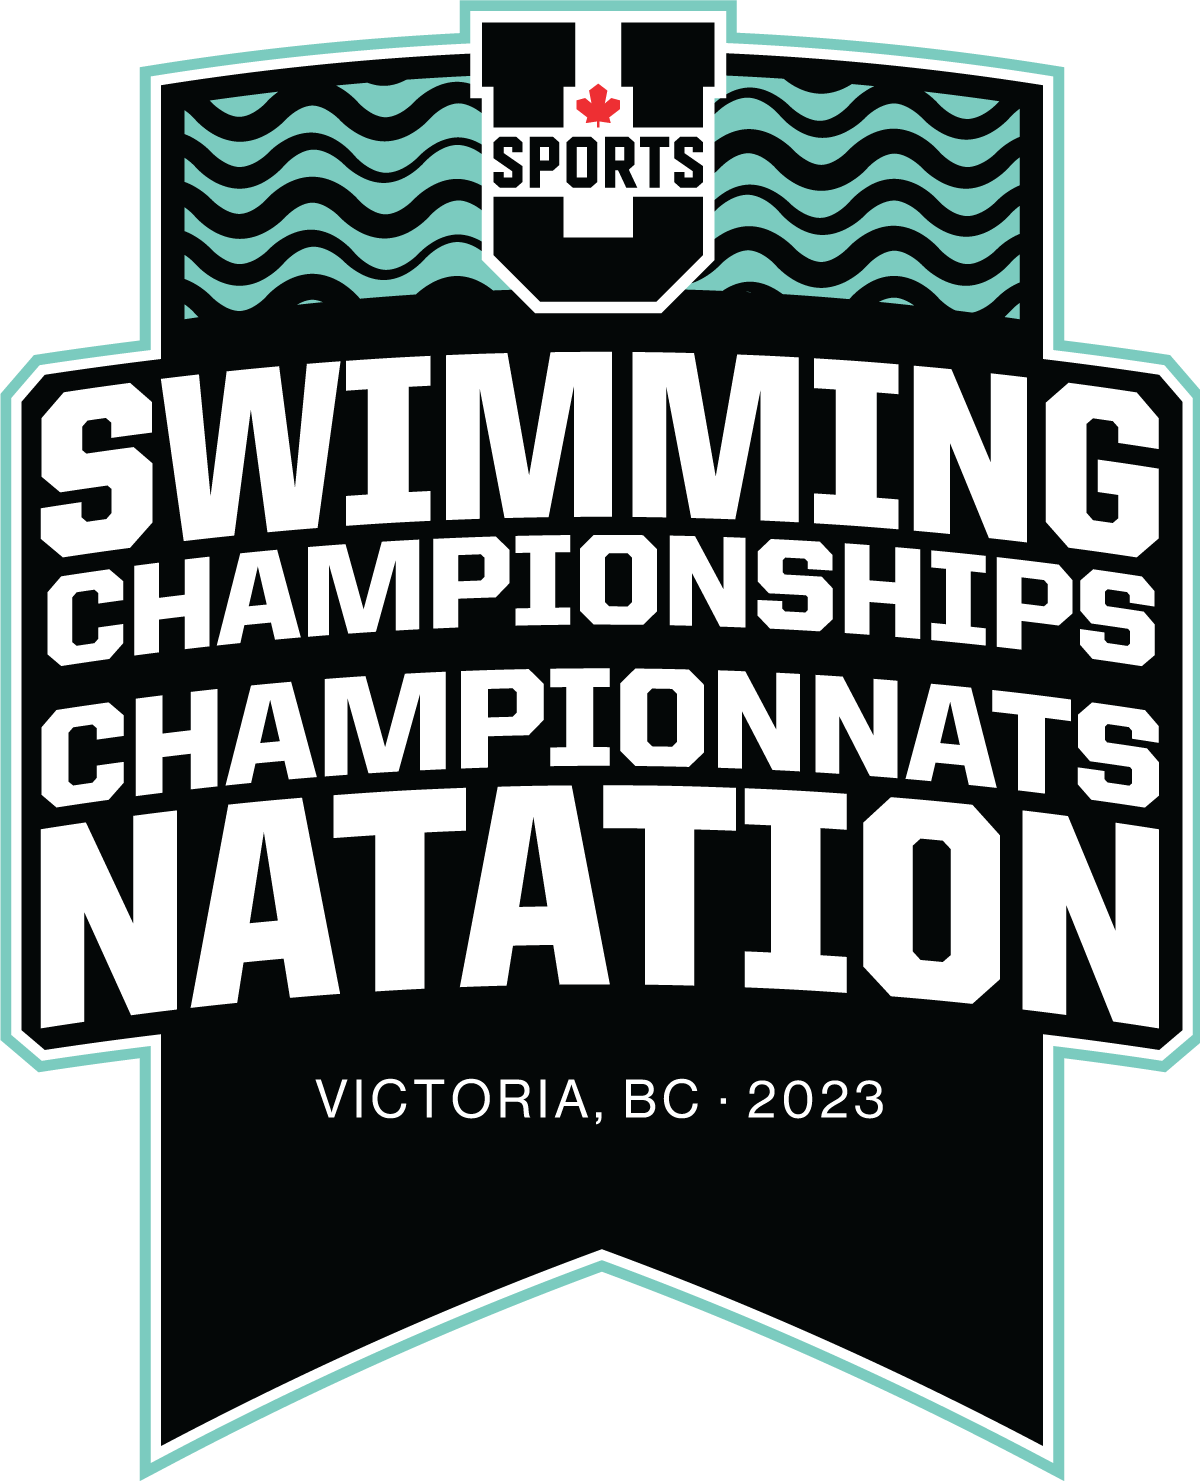 USports_Champ2223_swimming_Primary_CMYK_BL.png (102 KB)